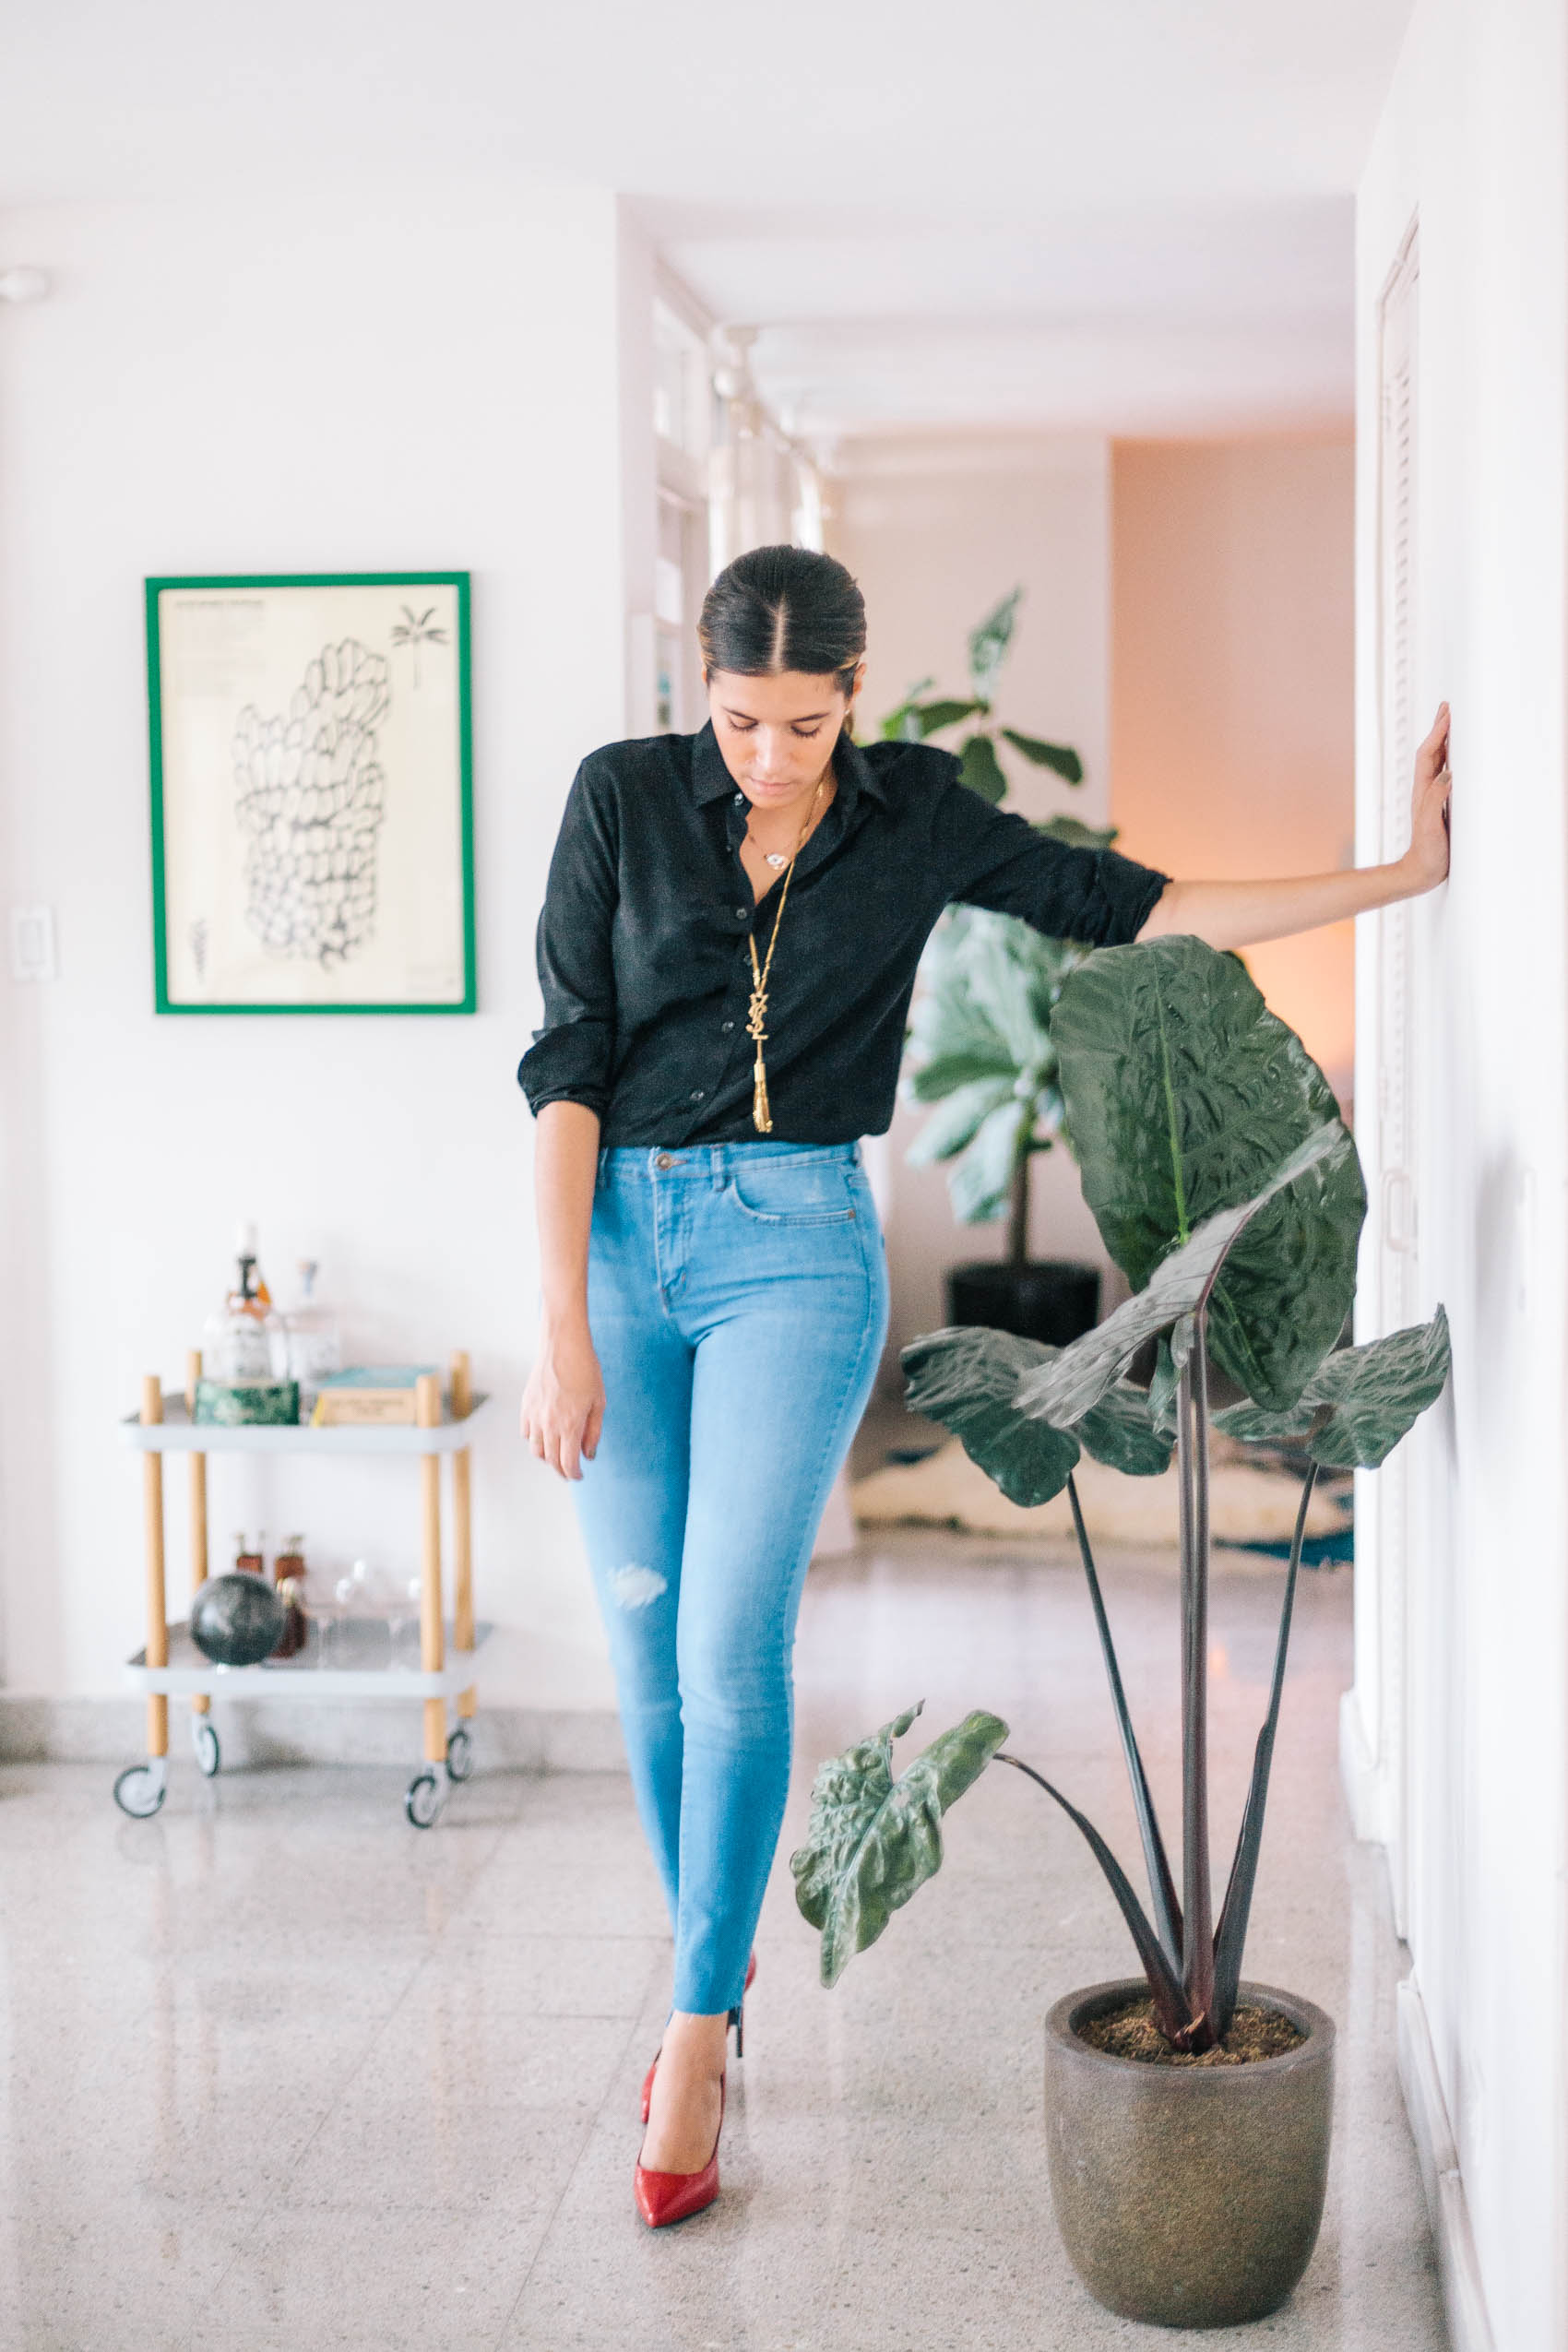 Blogger Maristella from Panama wears a YSL black silk star jacquard button down blouse, high waisted light blue wash skinny jeans with distressed detail and DIY cut ankle hems, Saint Laurent Paris patent leather pumps in red